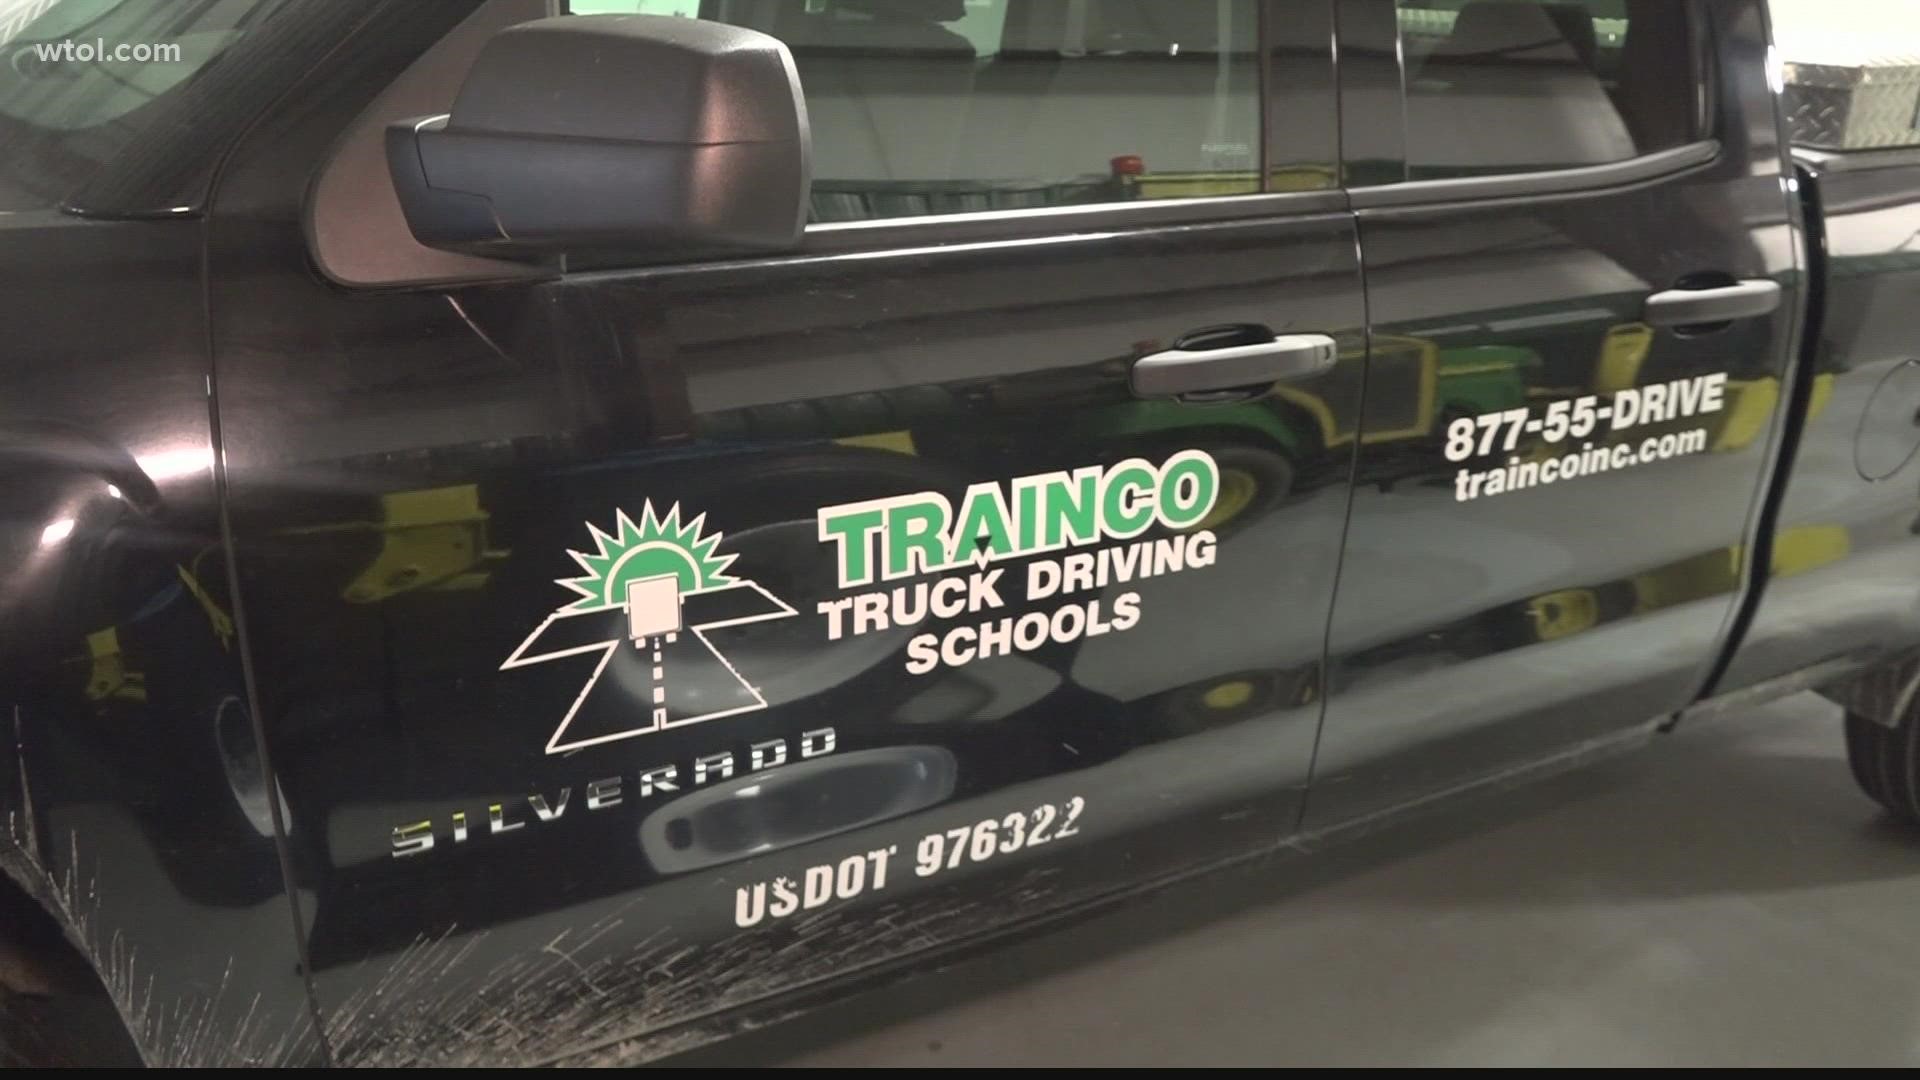 How local trucking schools are viewing the uptick in enrollment.